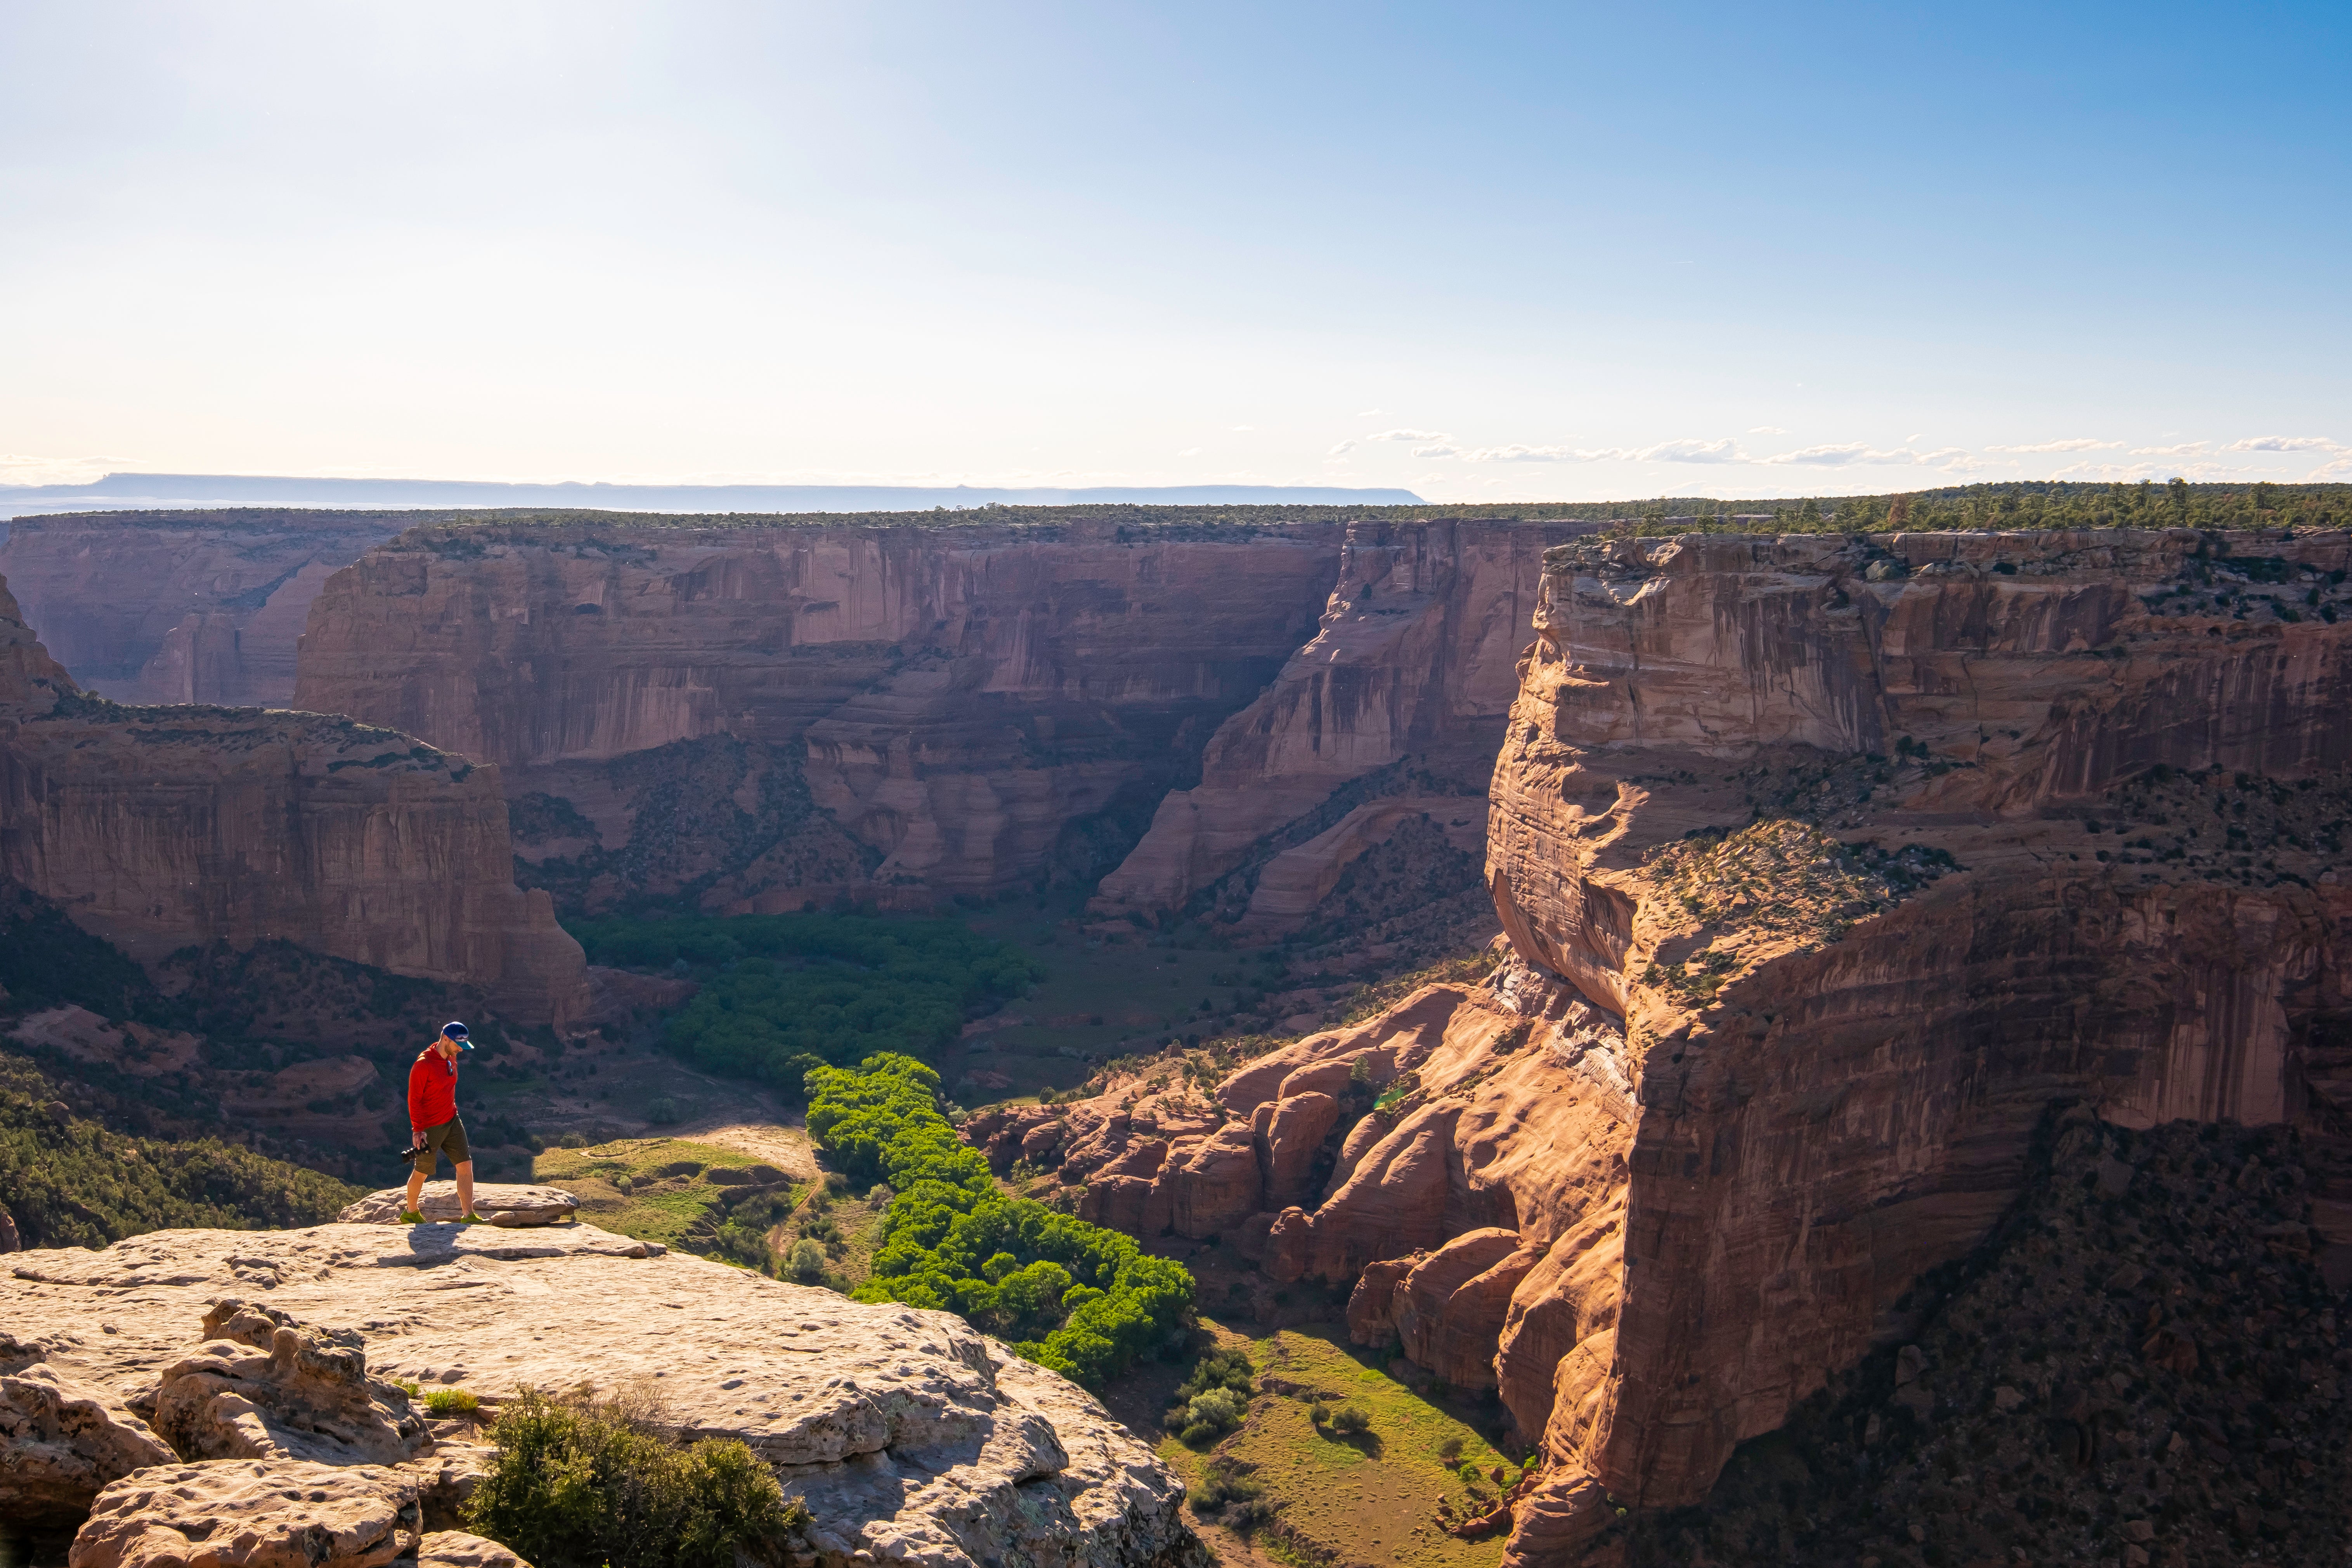 From hiking the Grand Canyon to kayaking Horseshoe Bend, you’ll be wowed by Arizona’s natural wonders